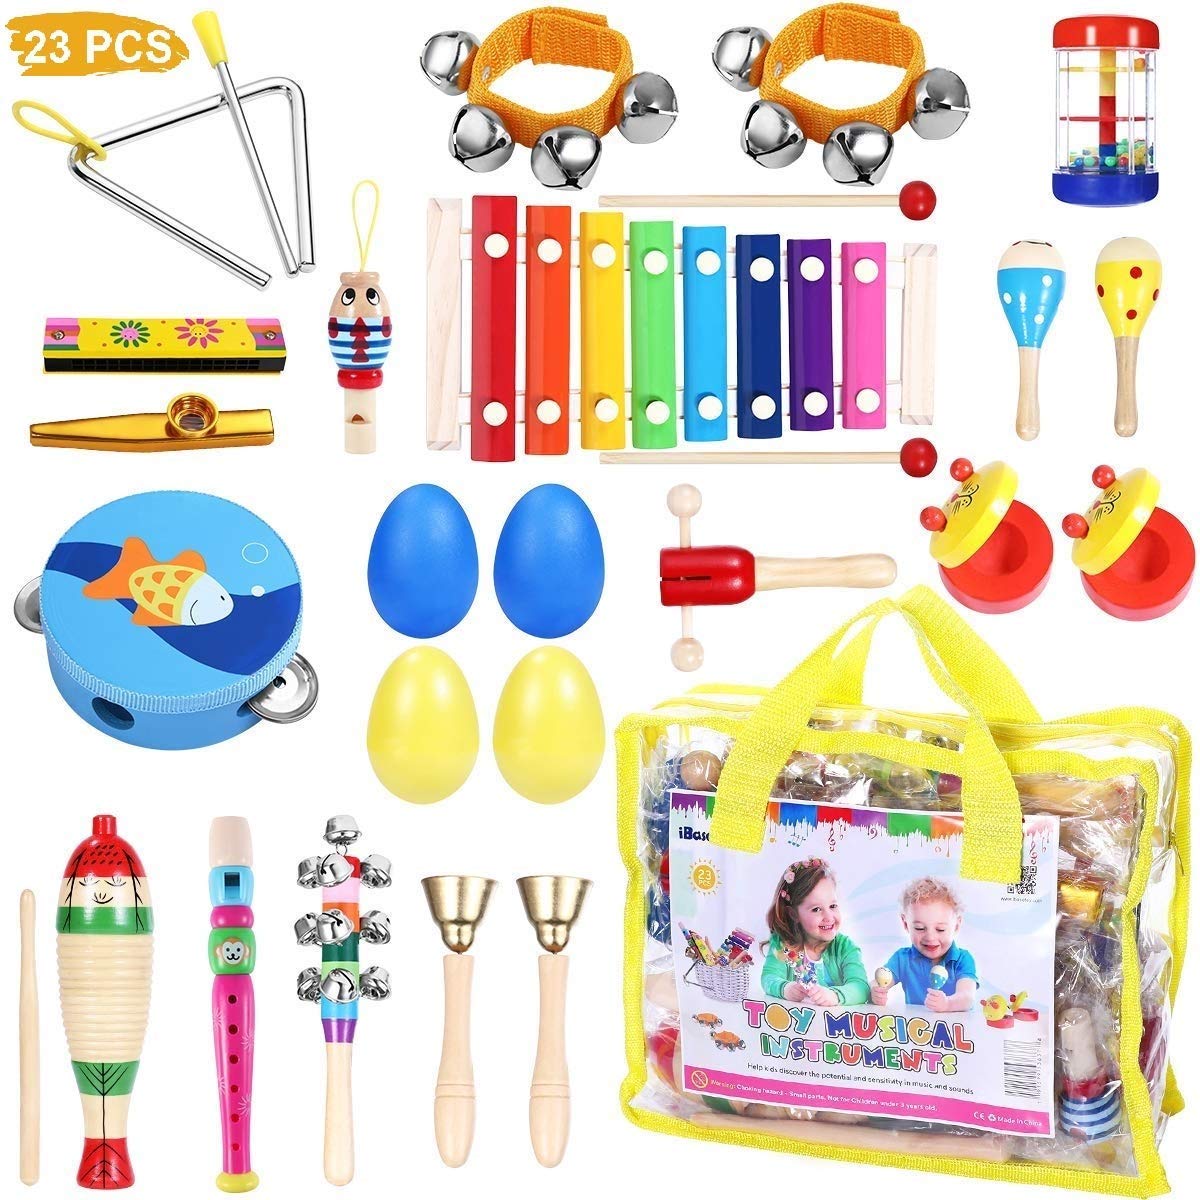 Toddler Musical Instruments - iBaseToy 23Pcs 16Types Wooden Percussion Instruments Tambourine Xylophone Toys